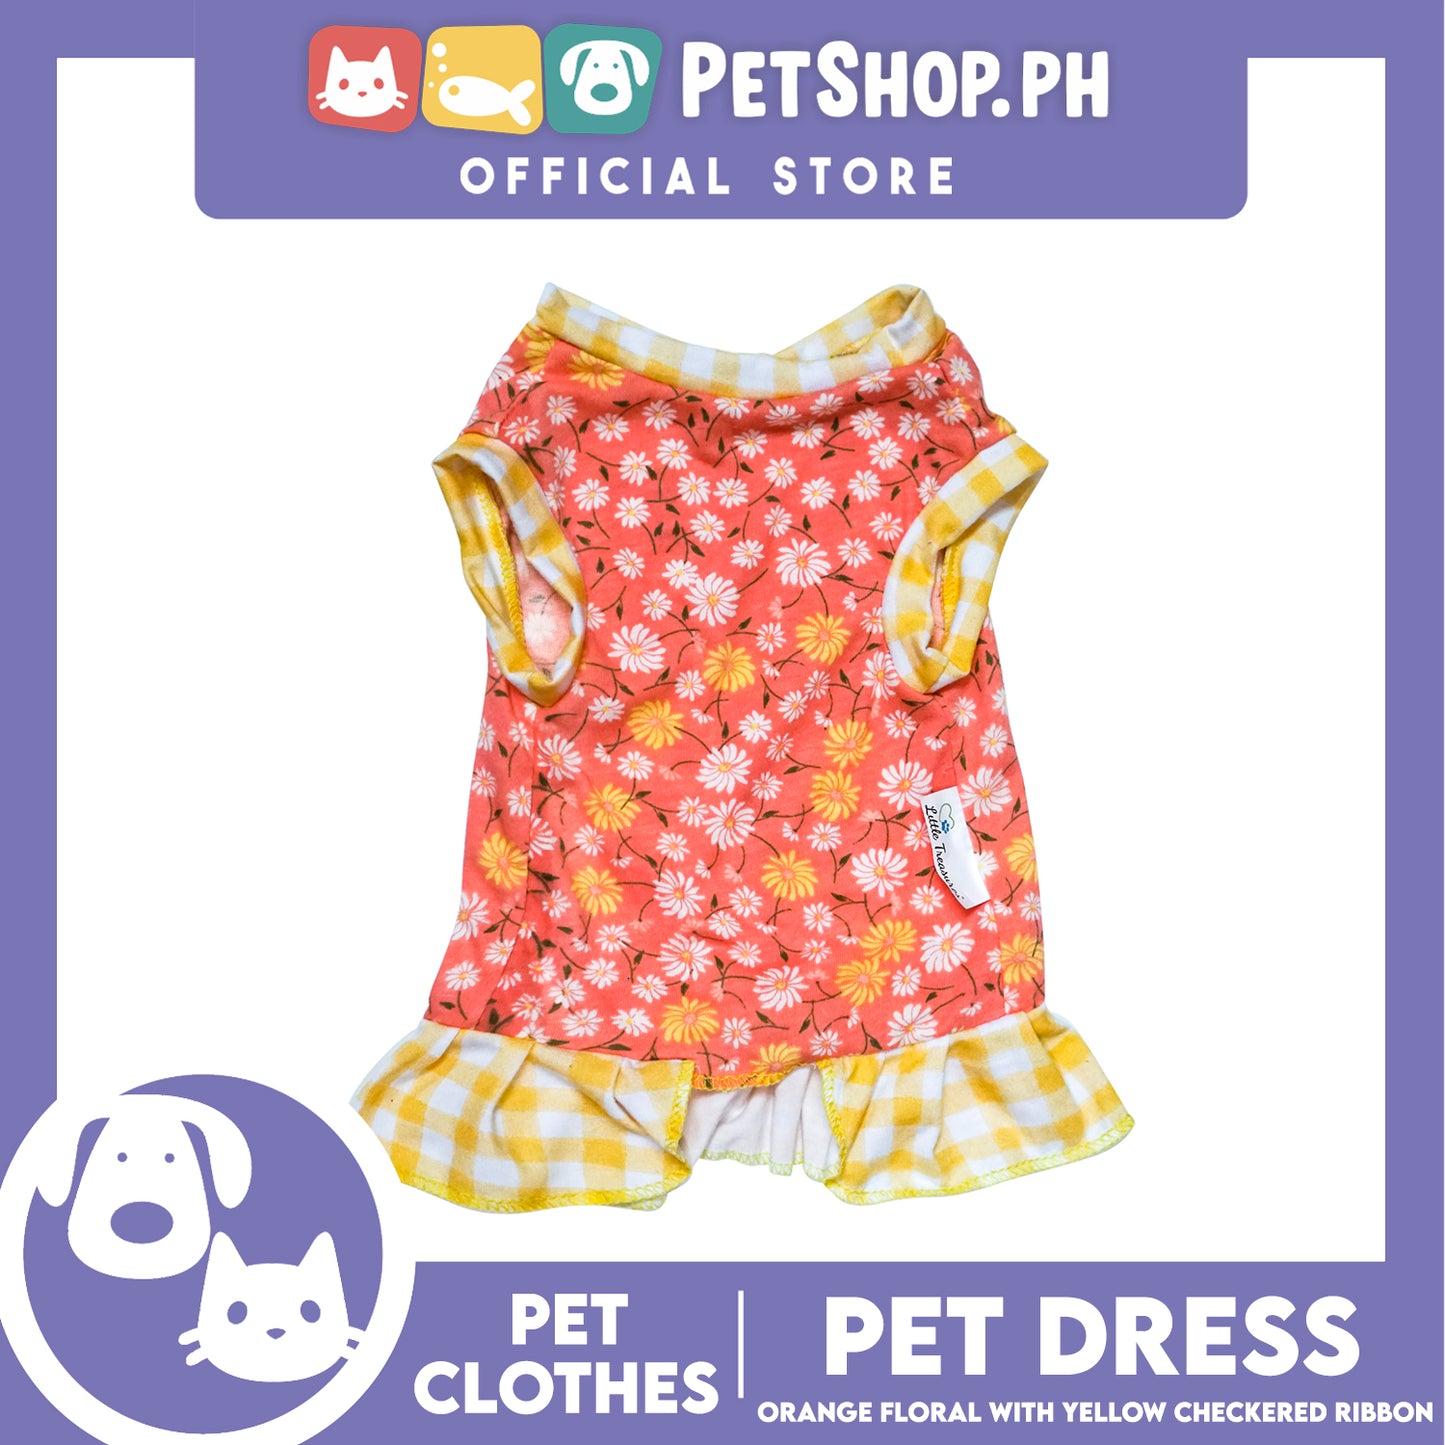 Pet Dress Orange Floral Yellow Checkered with Ribbon (Extra Large) Pet Dress Clothes Perfect for Dogs